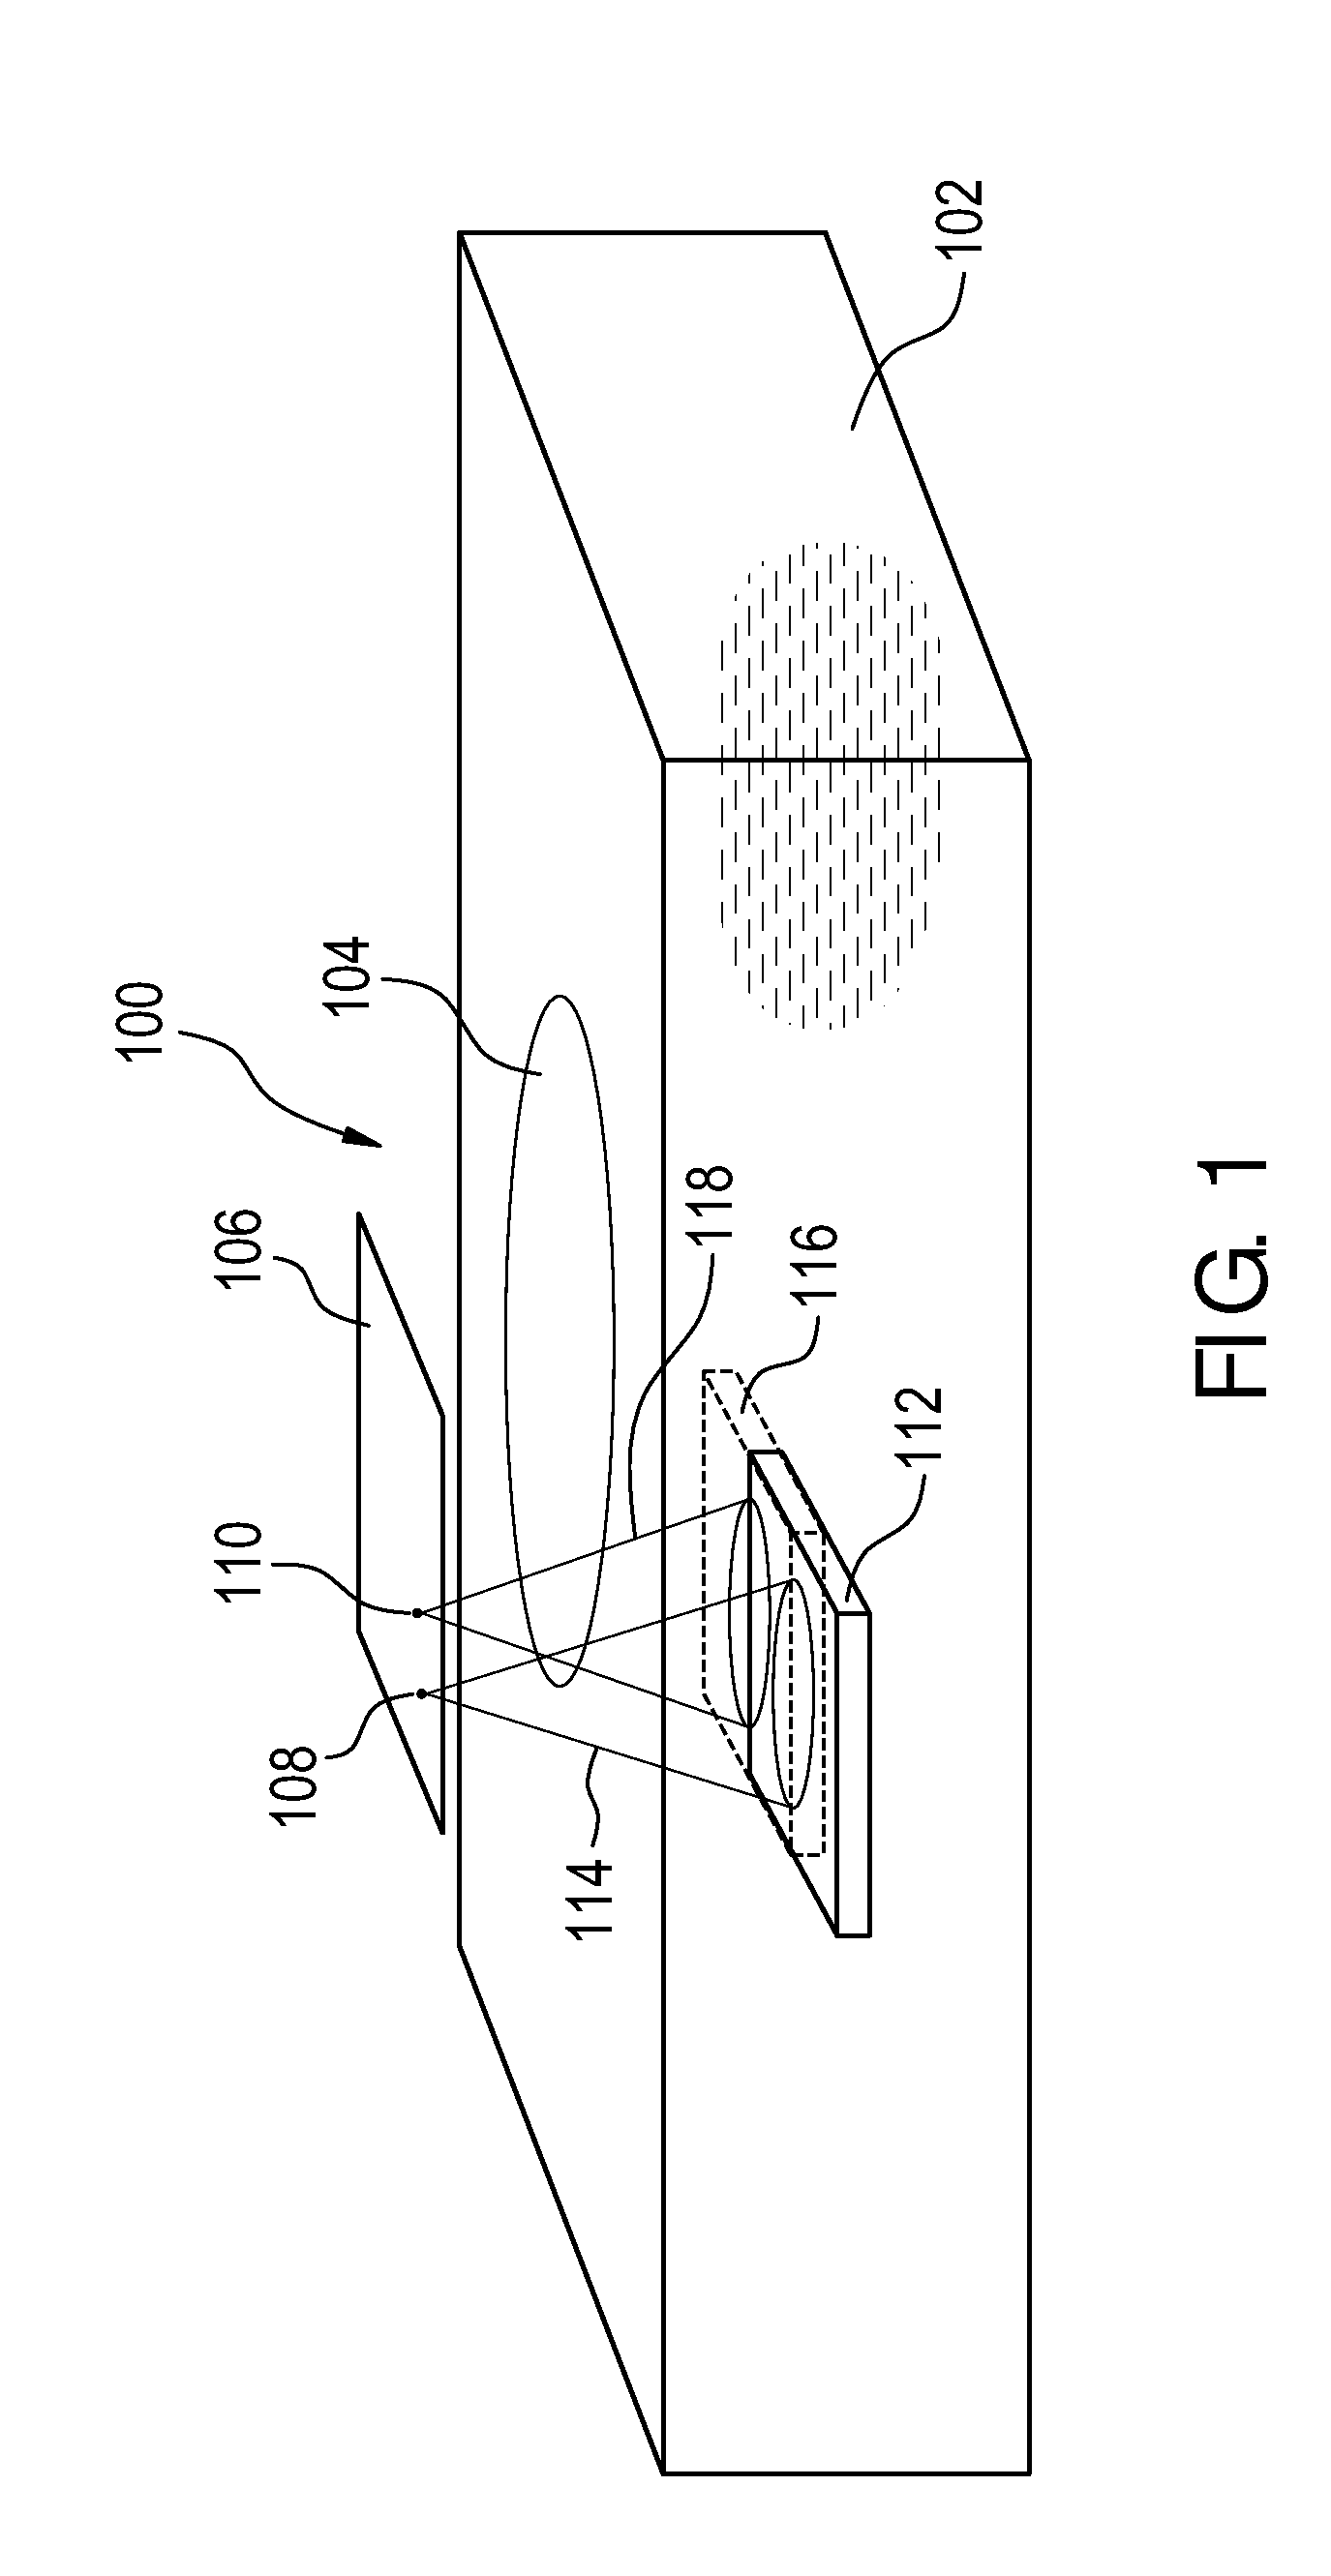 Therapeutic apparatus, computer program product, and method for determining an achievable target region for high intensity focused ultrasound